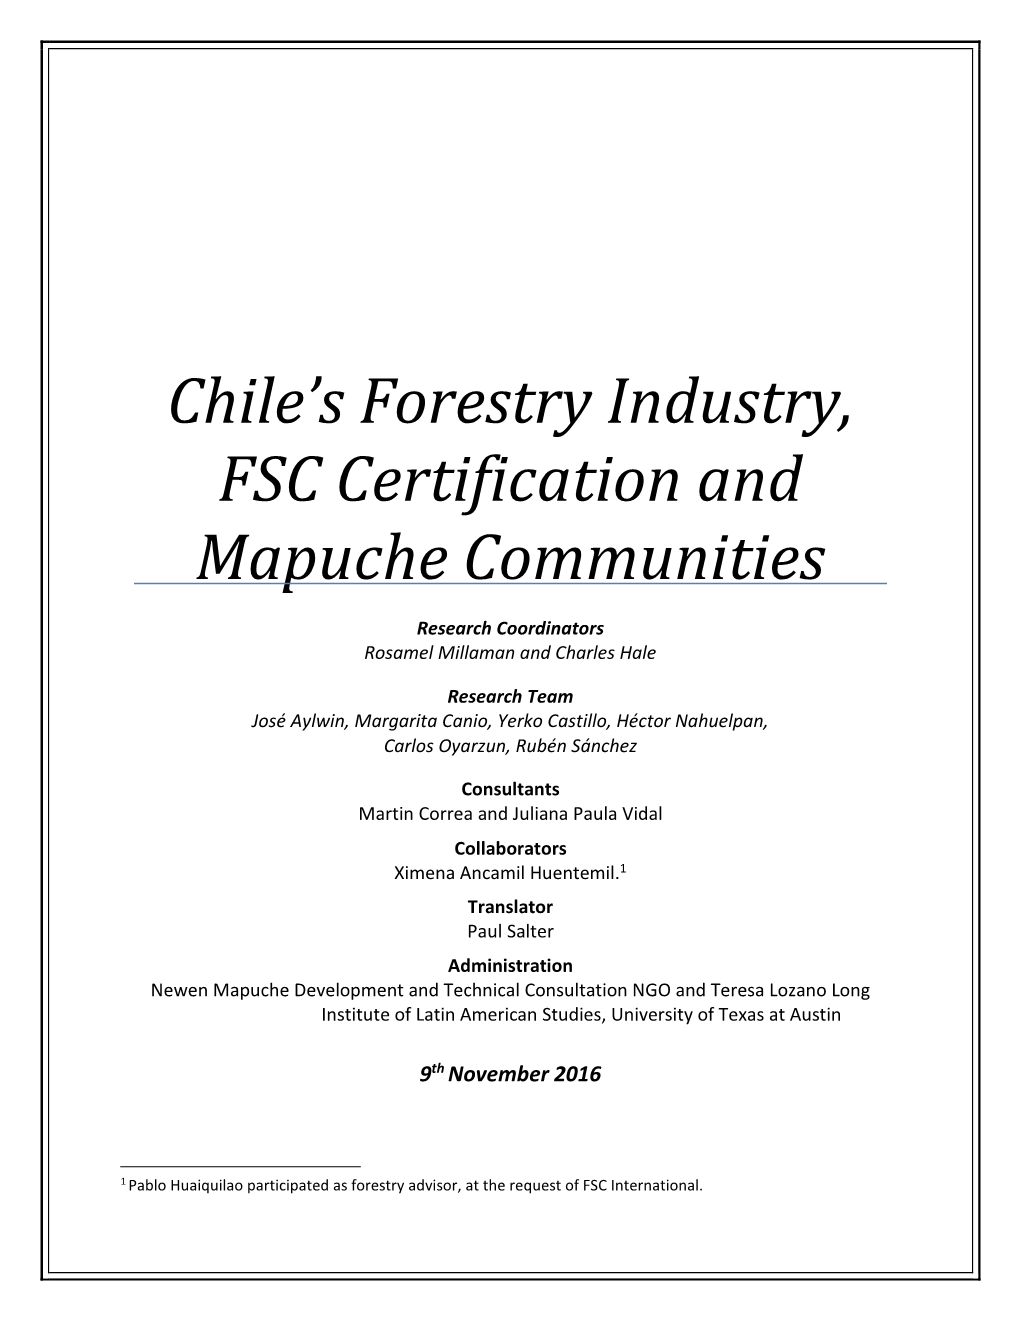 Chile's Forestry Industry, FSC Certification and Mapuche Communities